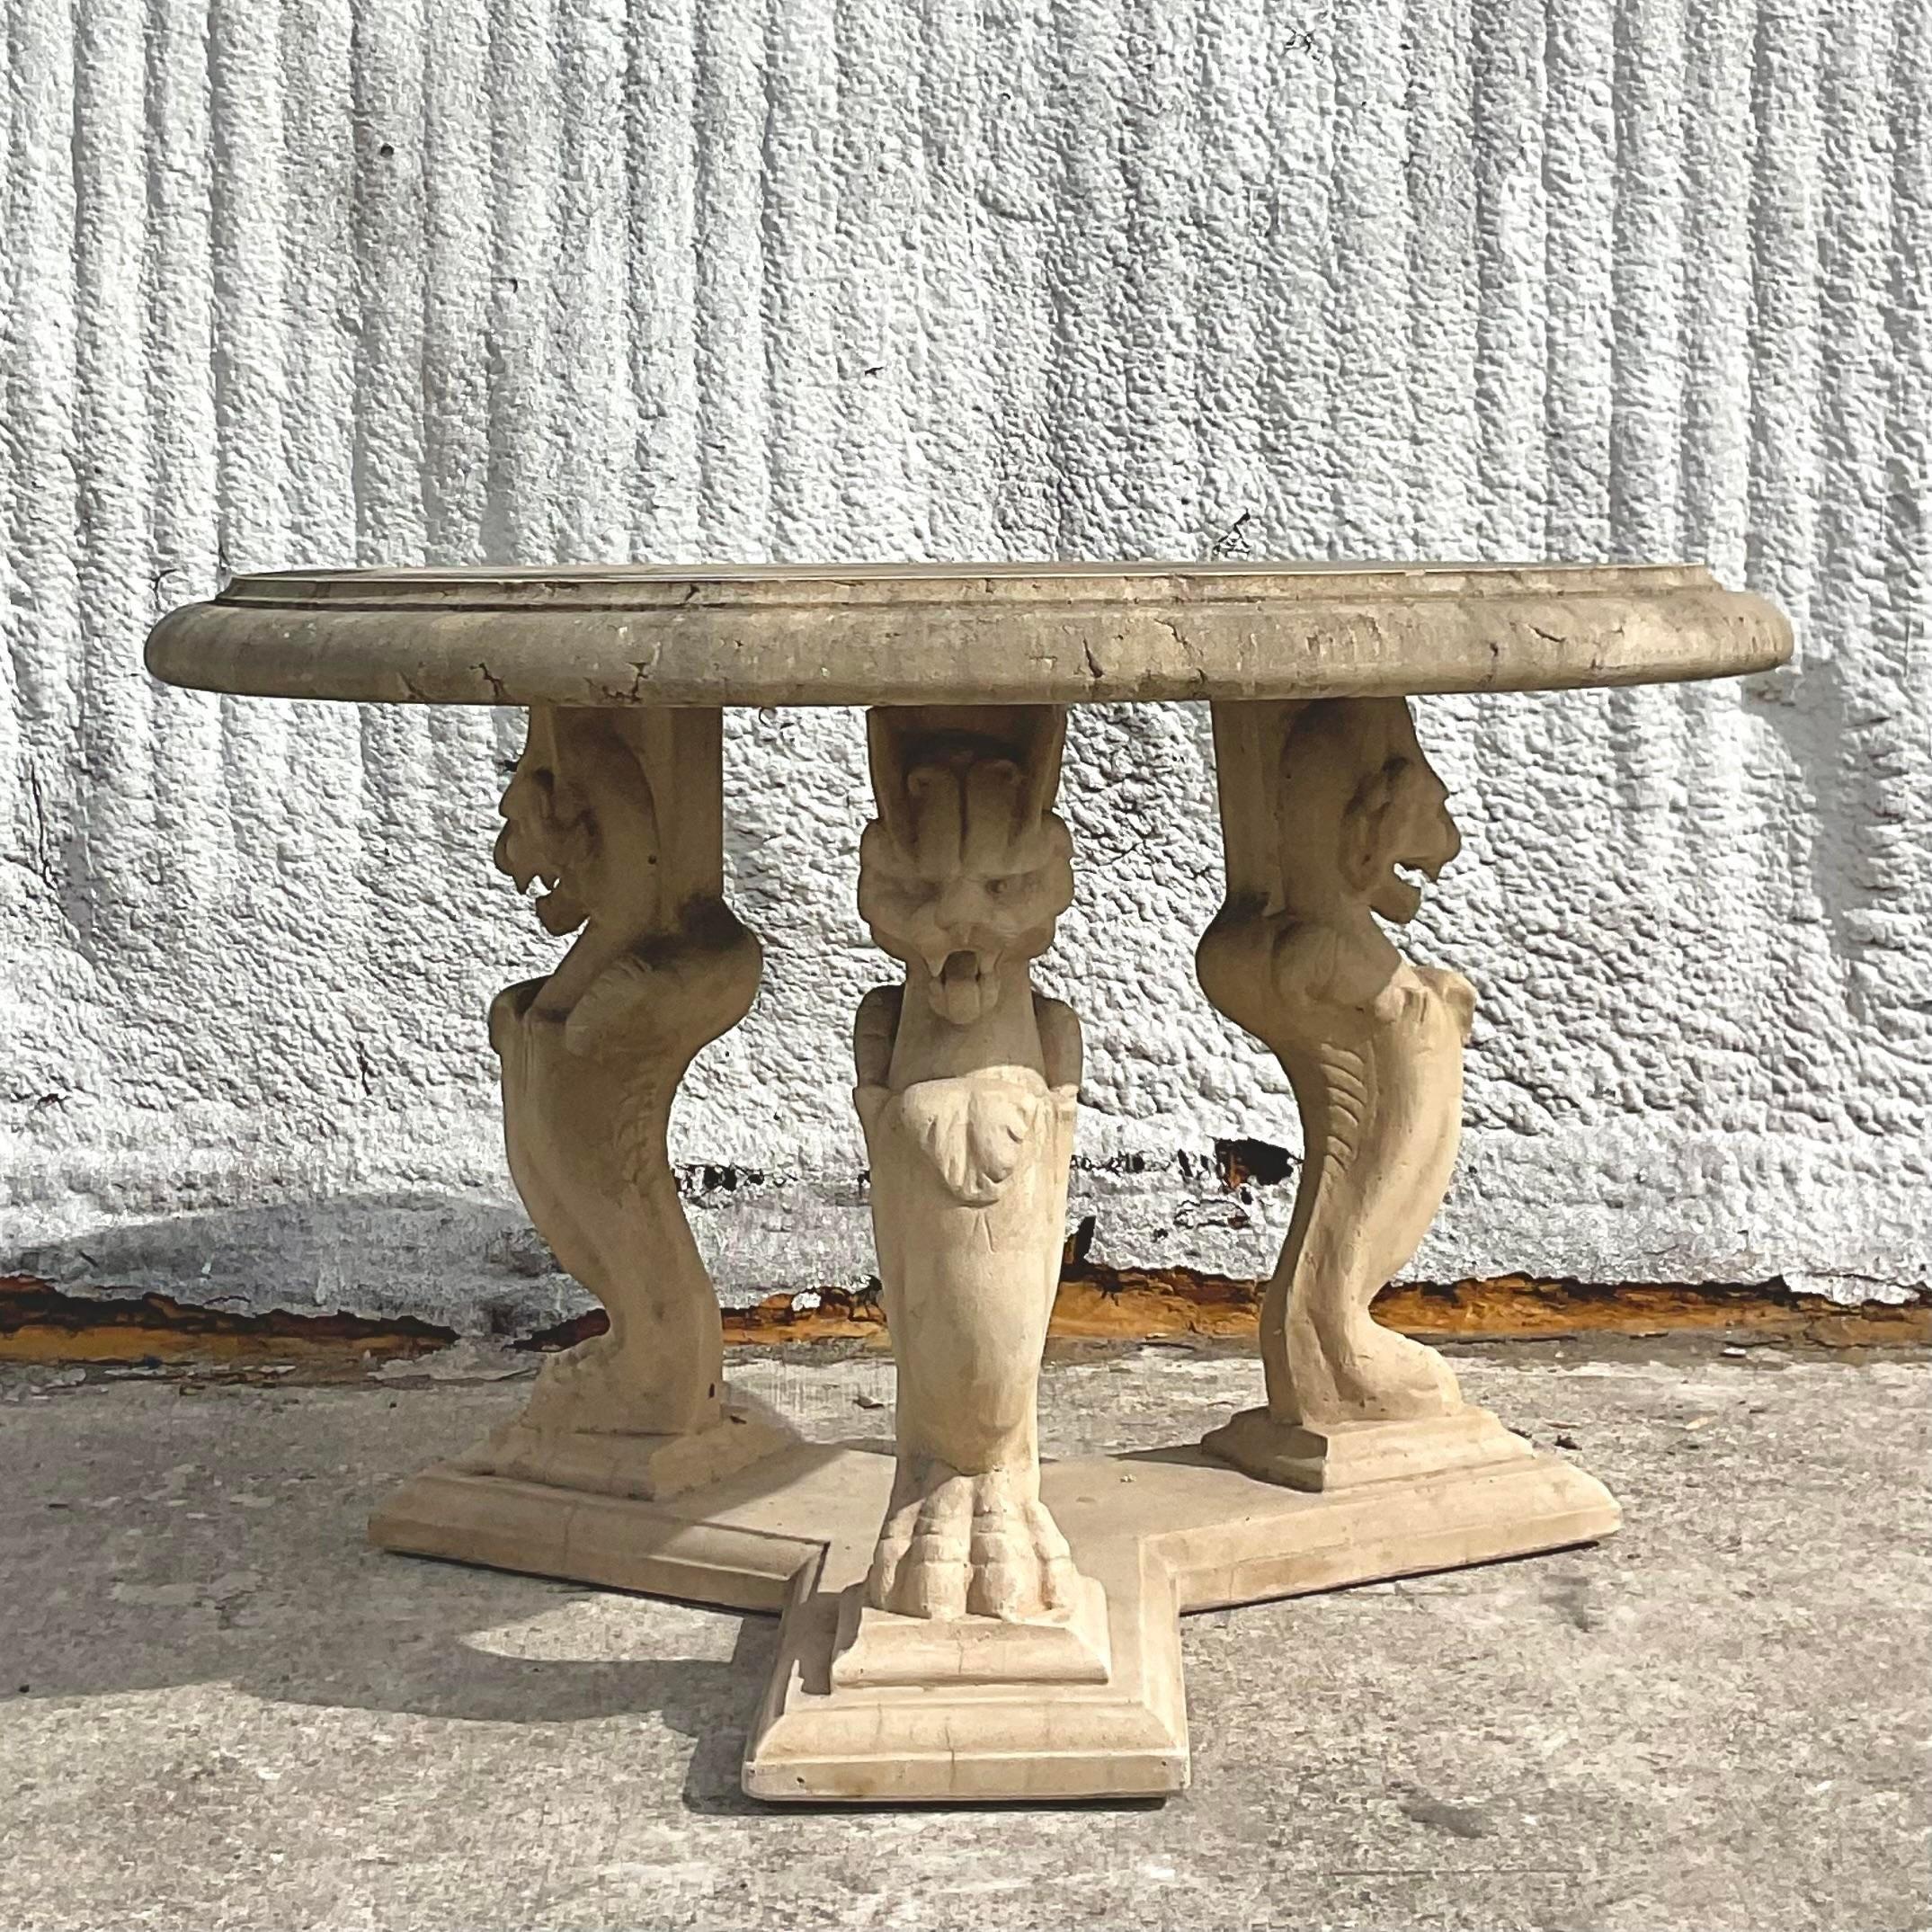 A stunning vintage Regency center hall table. A chic phoenix design in a cast concrete. A beautiful all over patina from time. Easily cleaned if you want a clean start. Perfect indoors or outside. You decide! Acquired from a Palm Beach estate.